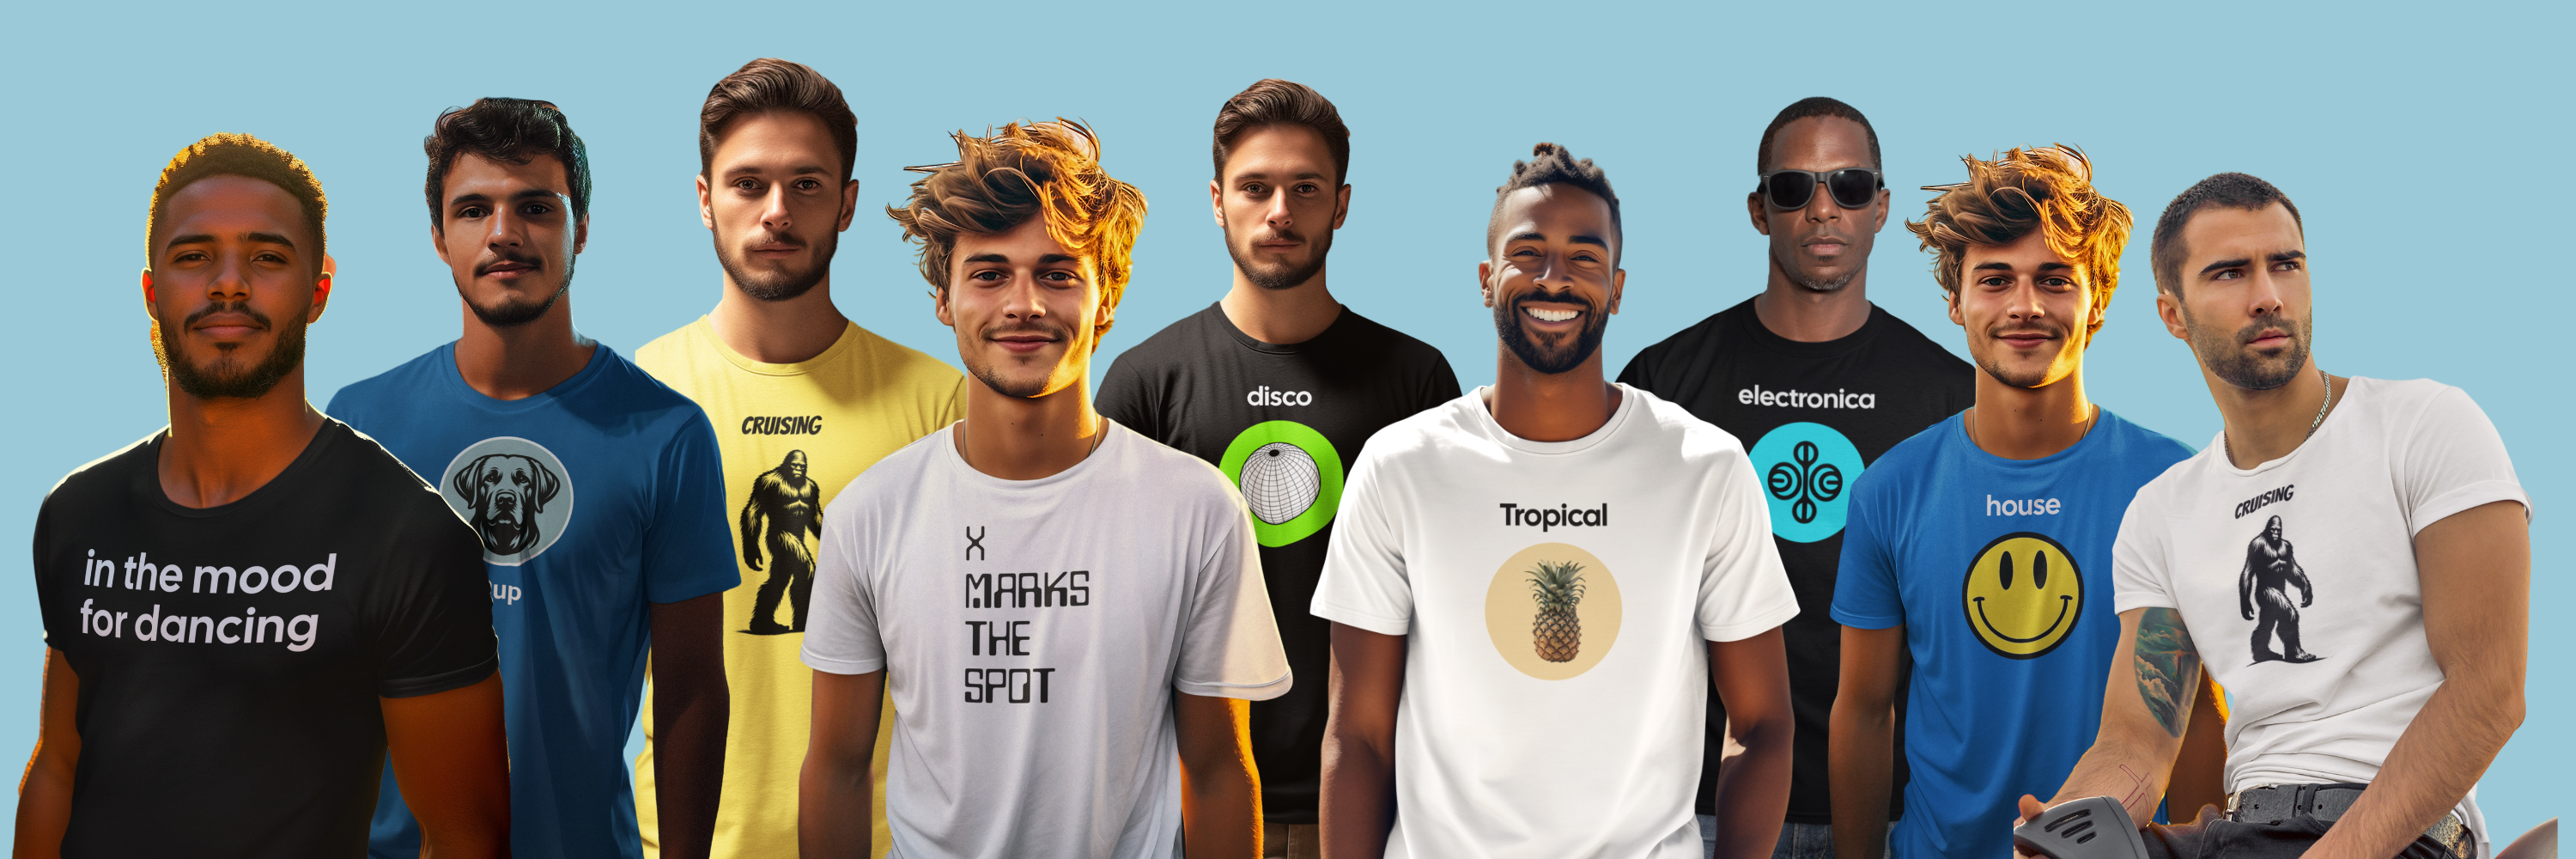 men in various t shirts from the have a few words store